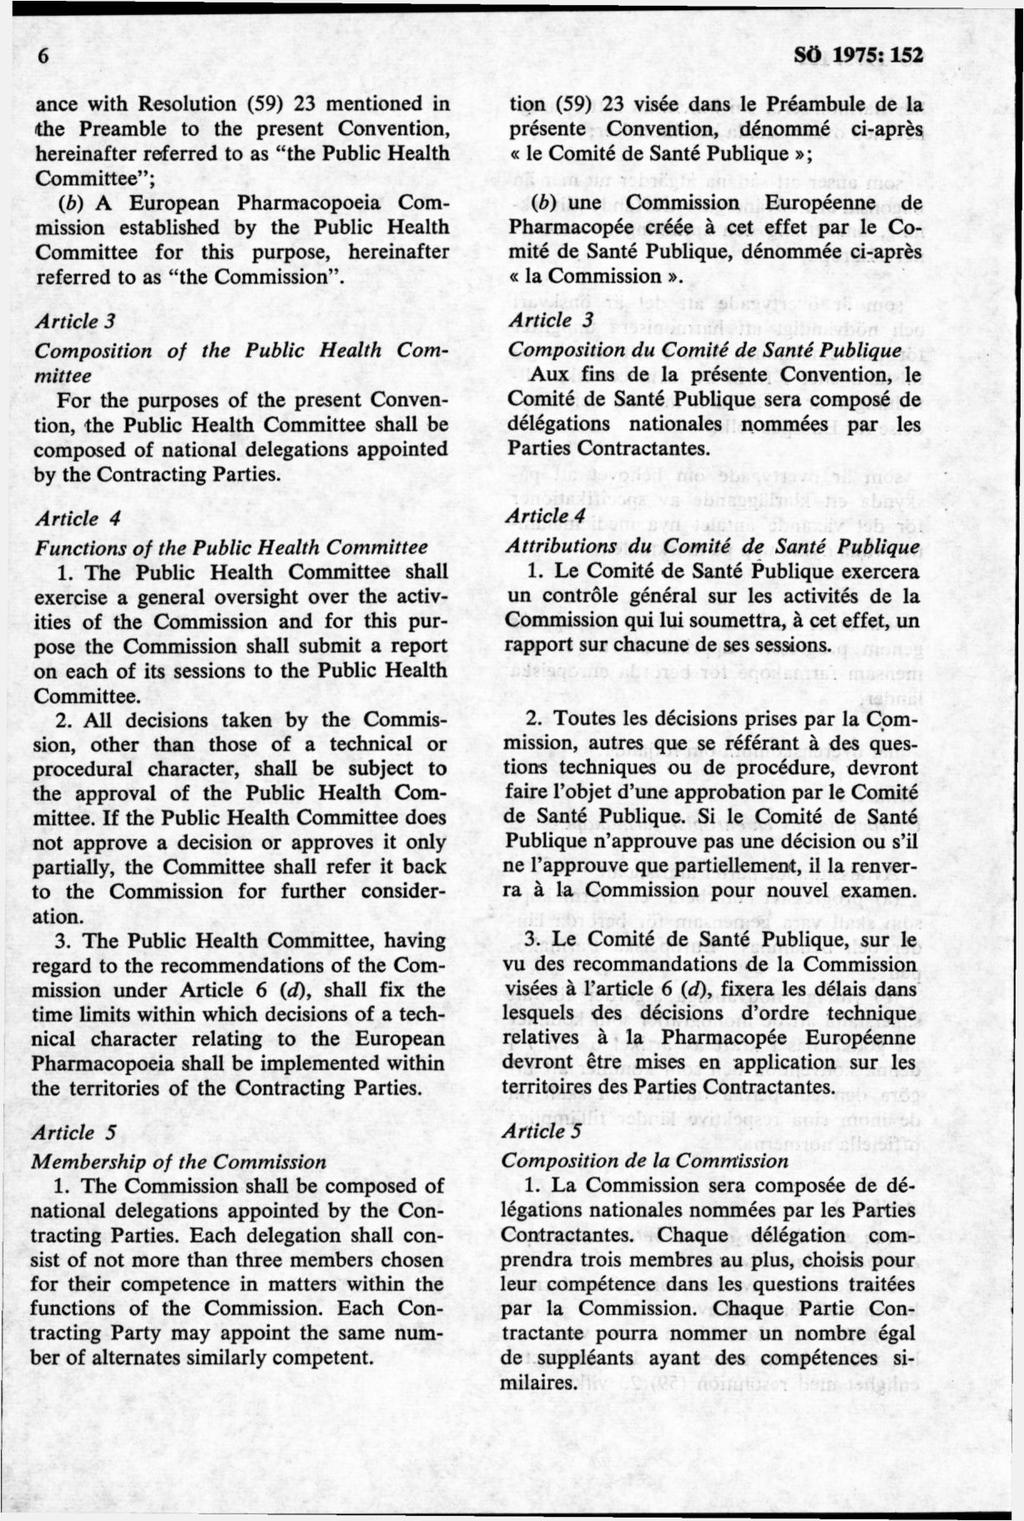 ance with Resolution (59) 23 mentioned in the Preamble to the present Convention, hereinafter referred to as the Public Health Committee ; Cb) A European Pharmacopoeia Commission established by the